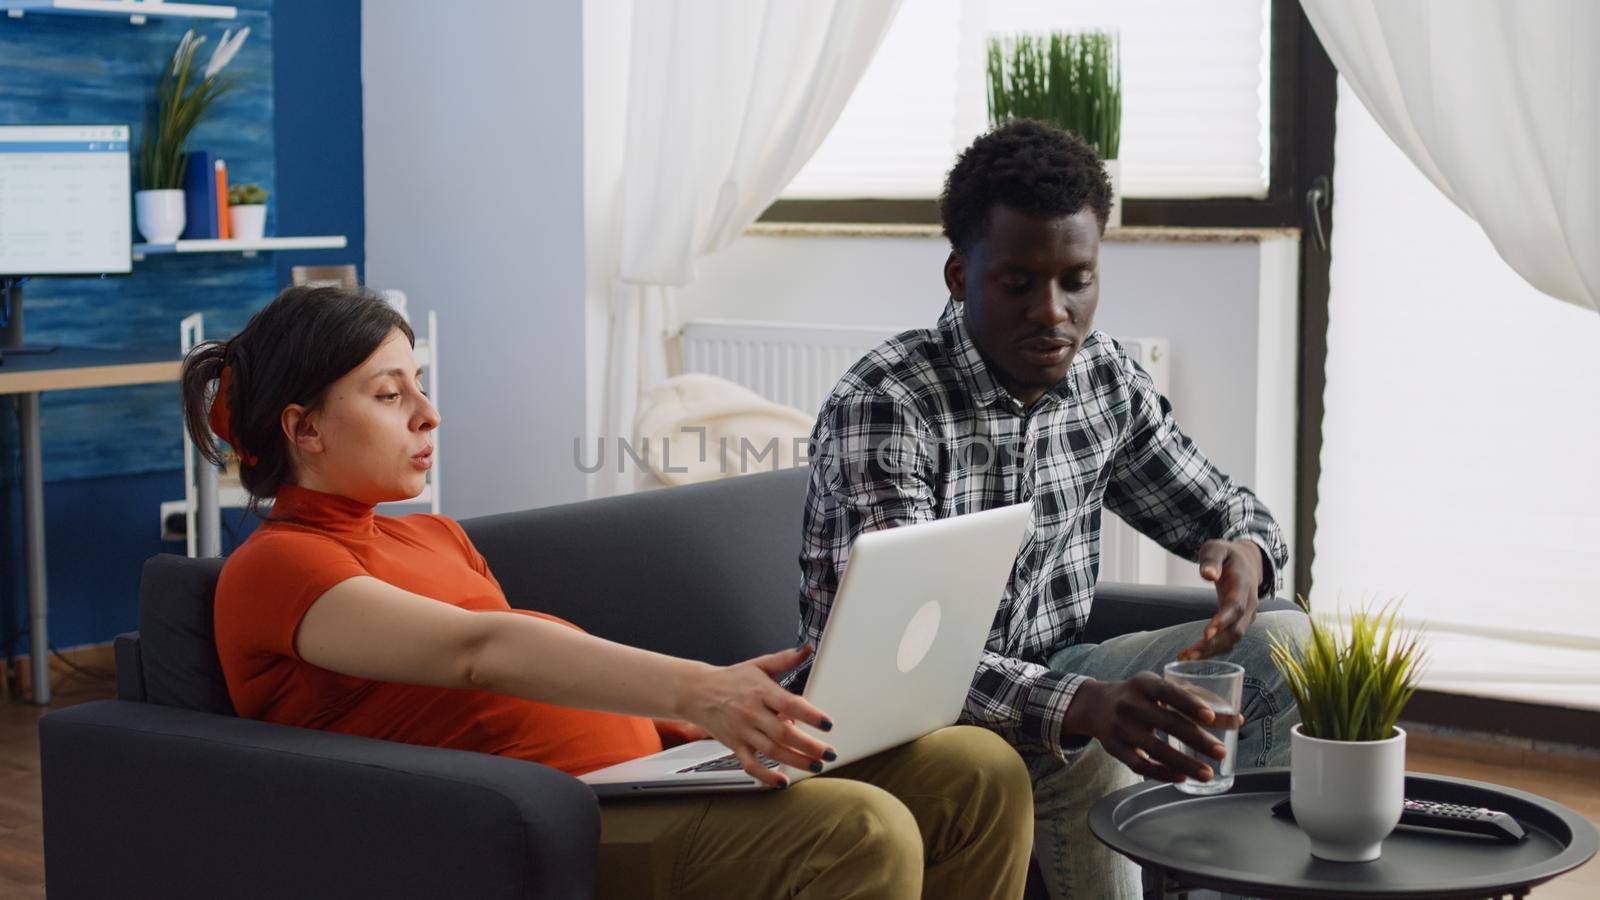 Interracial couple with pregnancy sitting together on couch while talking about child. Young pregnant woman using laptop and black man expecting baby and bonding in living room.